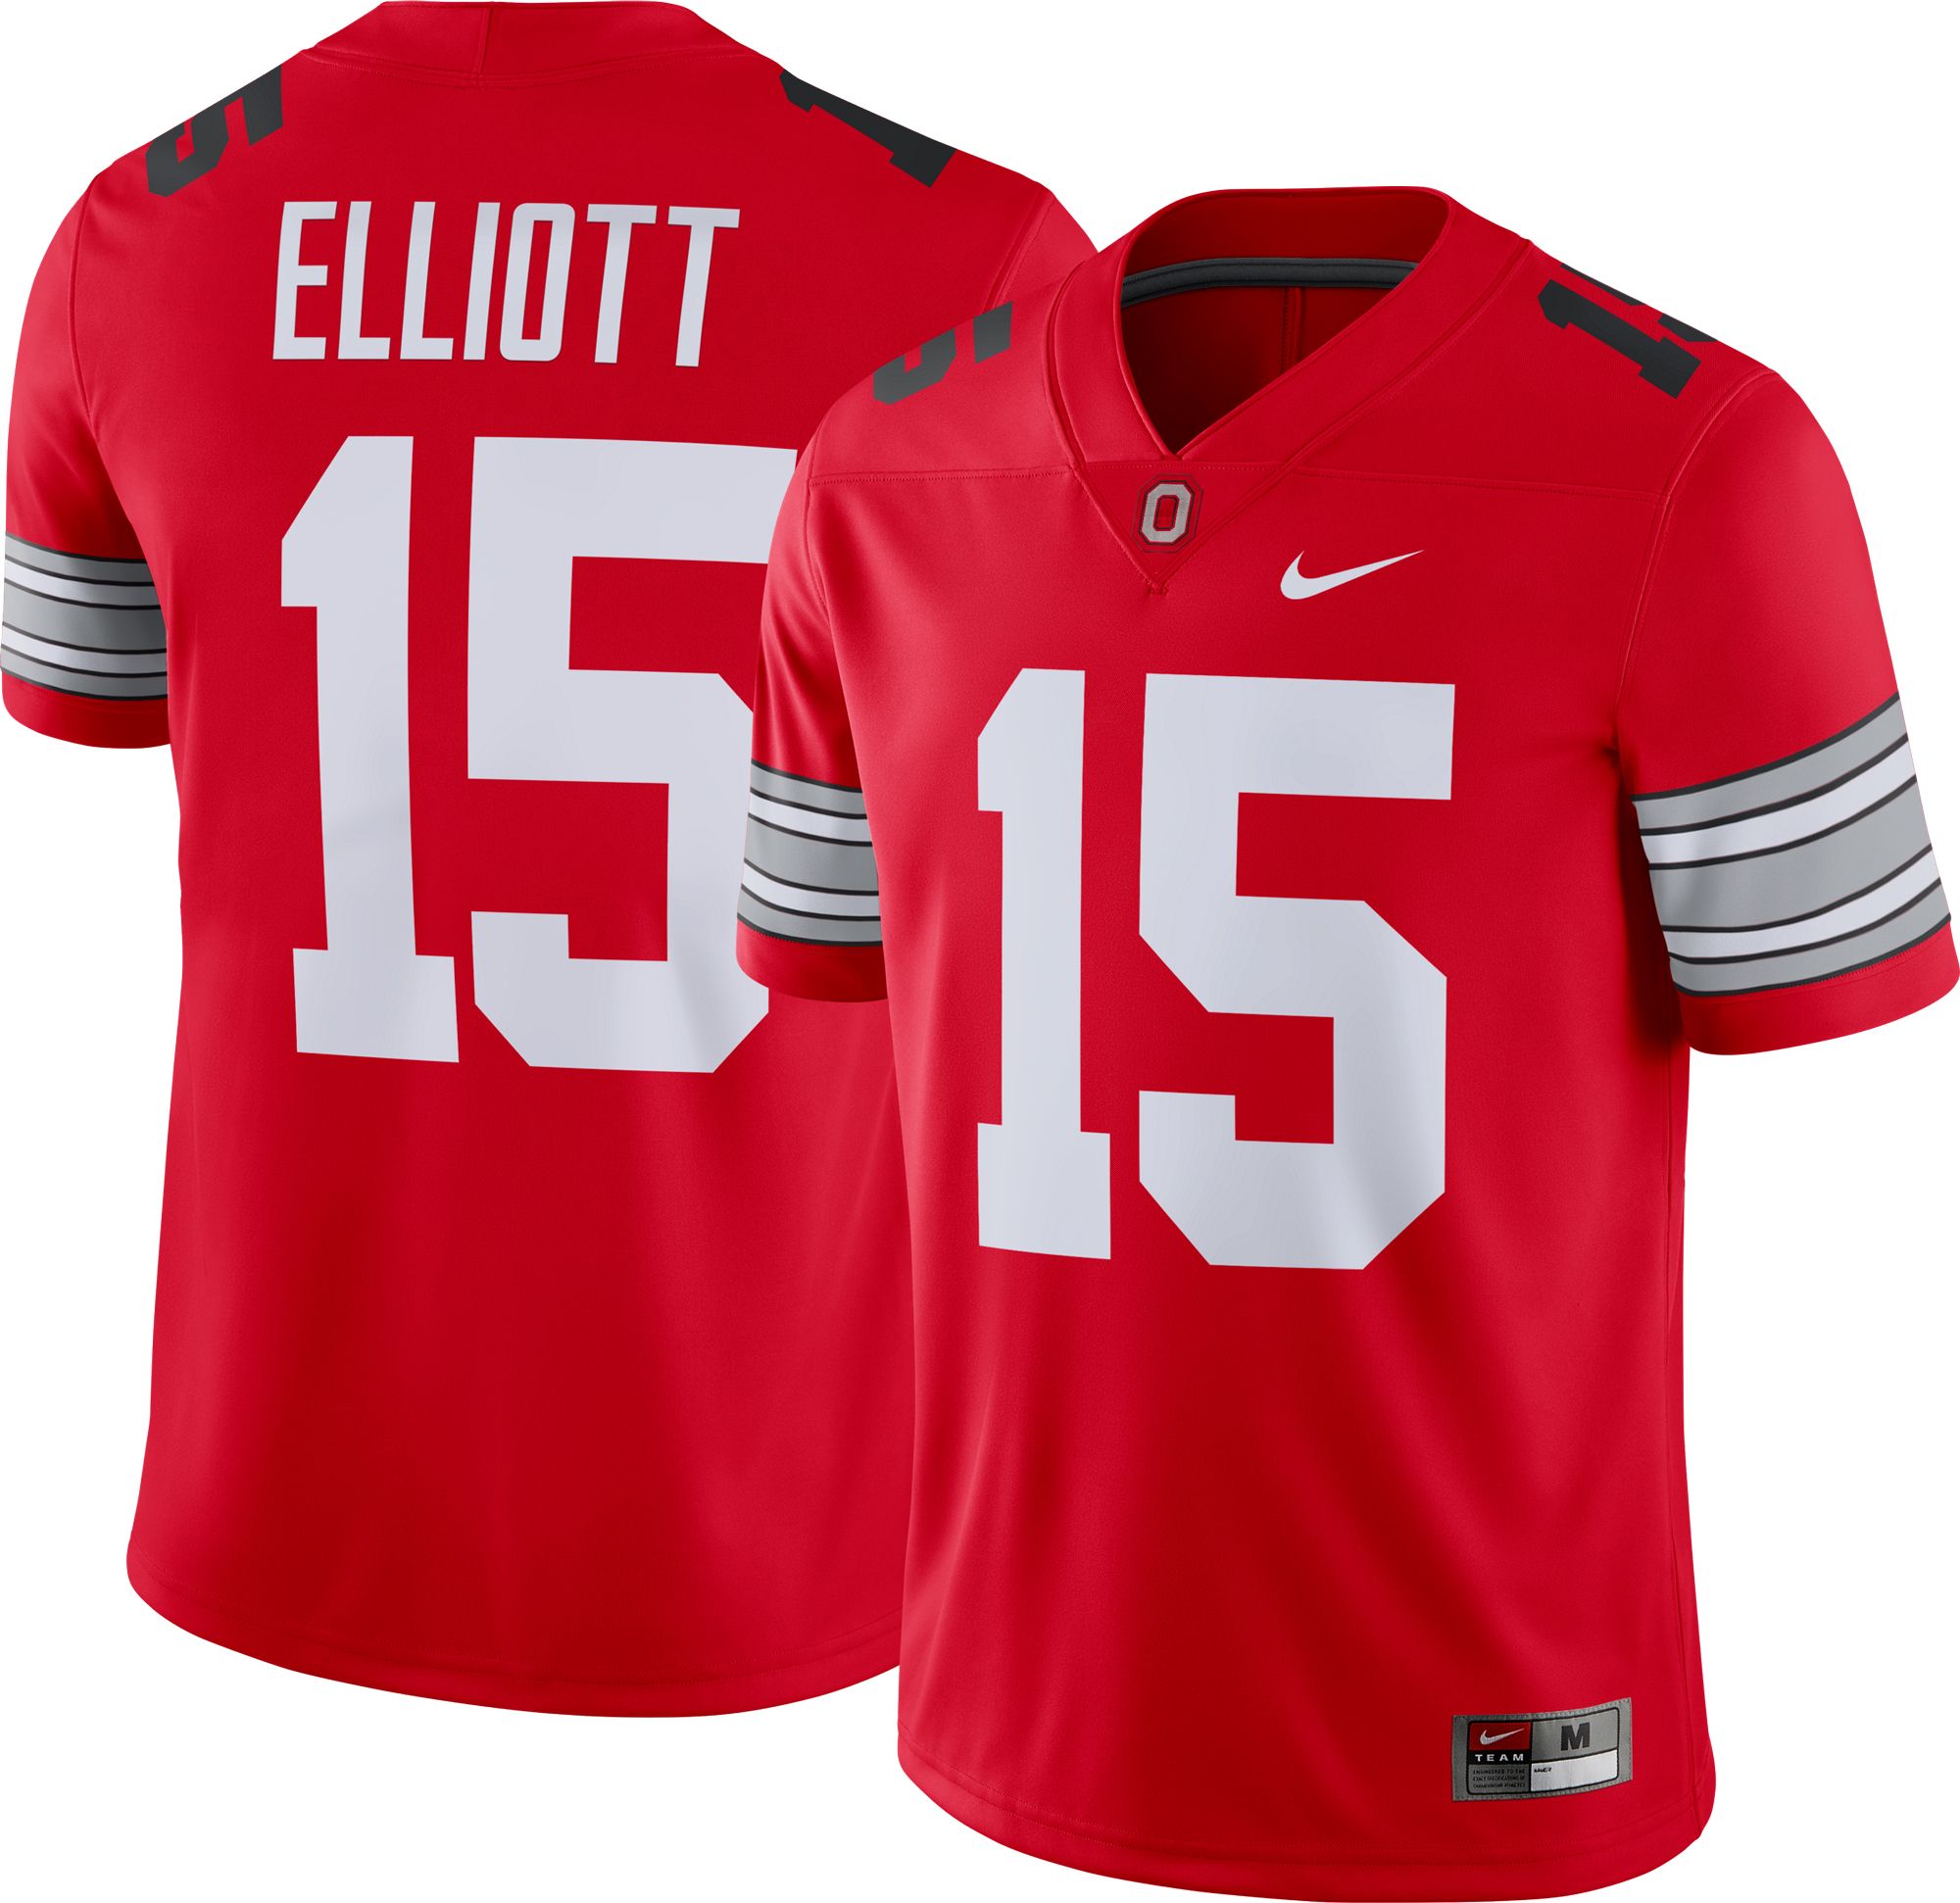 buy ohio state jersey